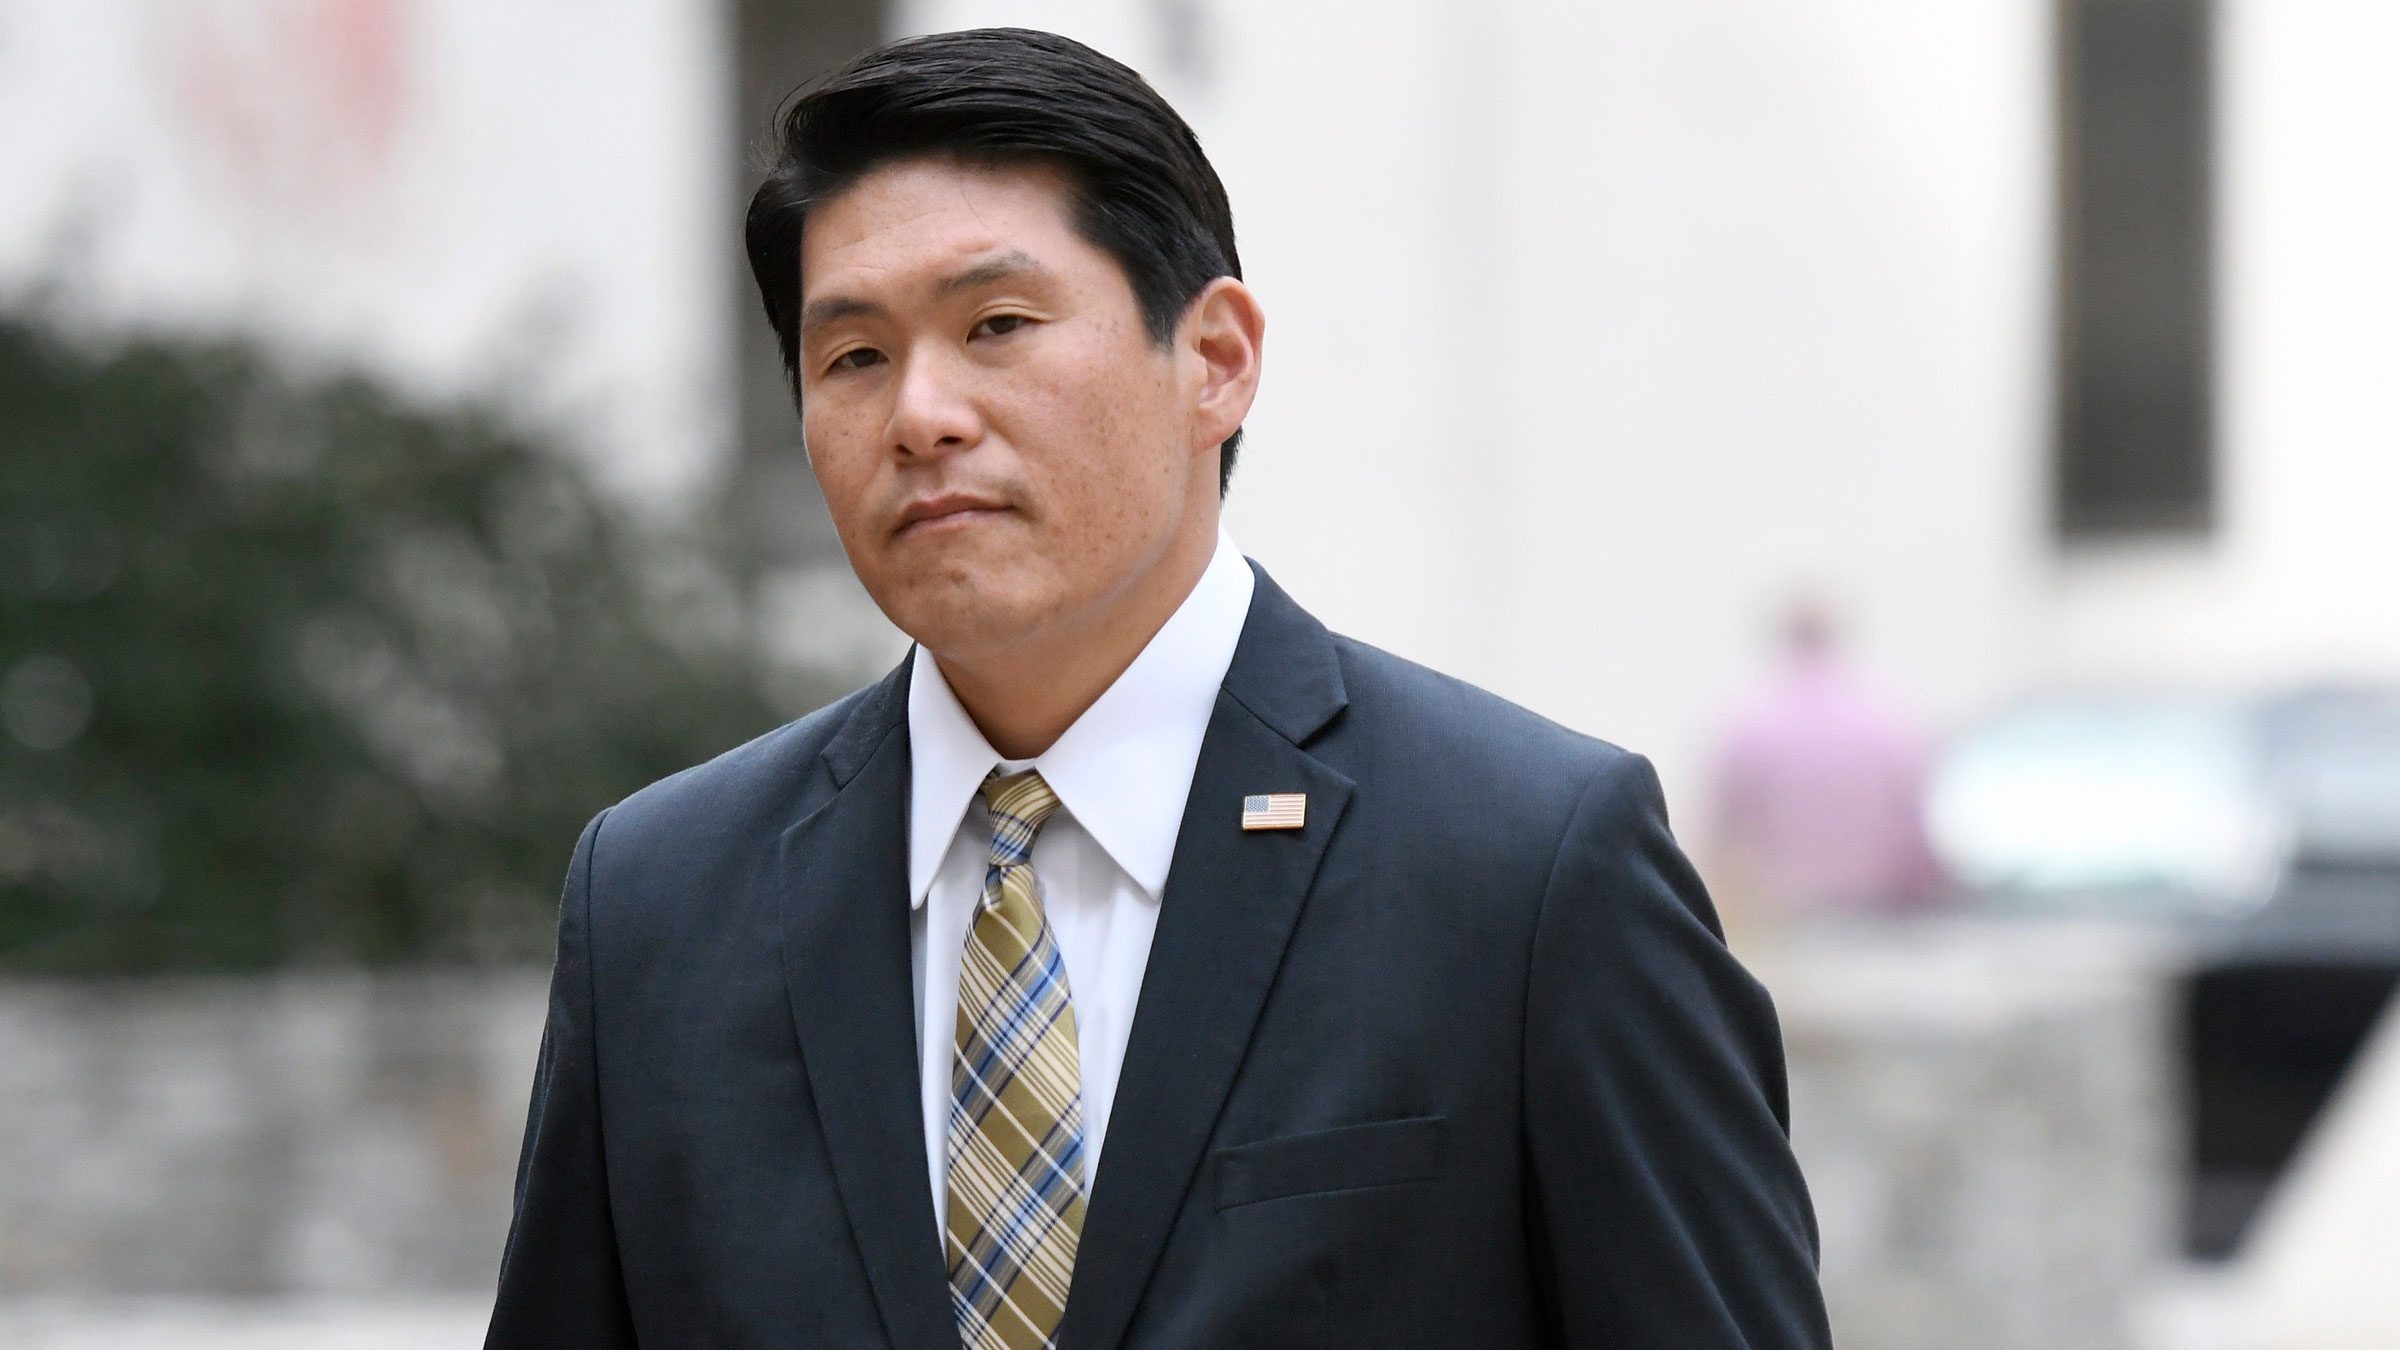 US Attorney Robert Hur arrives at US District Court in Baltimore in November 2019.